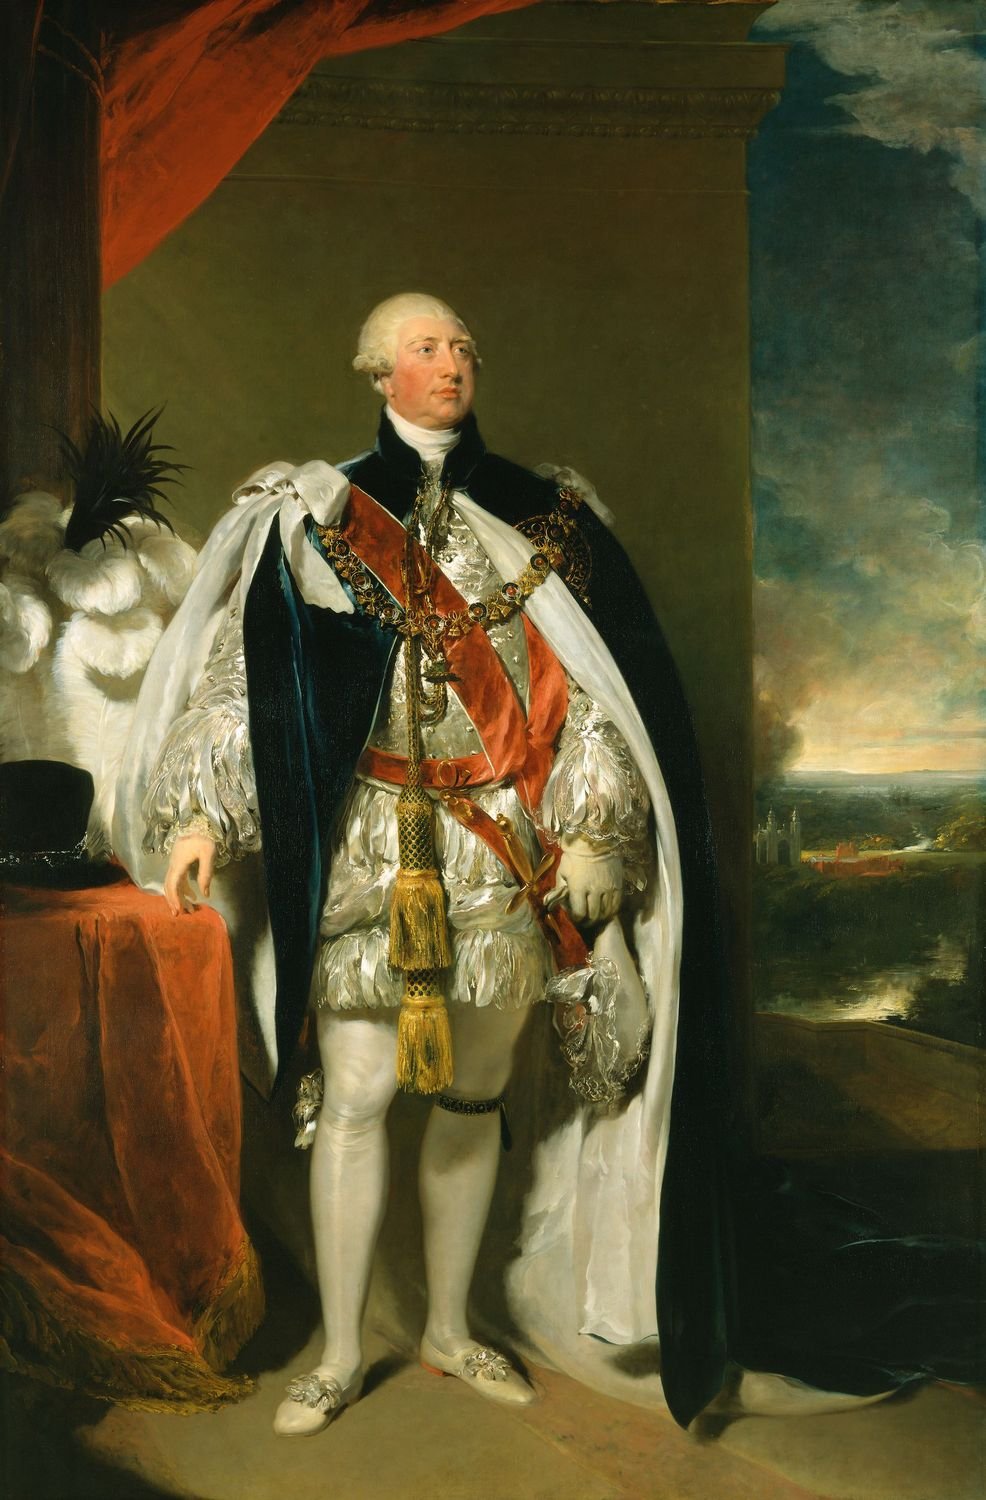 Portrait of King George III by Thomas Lawrence